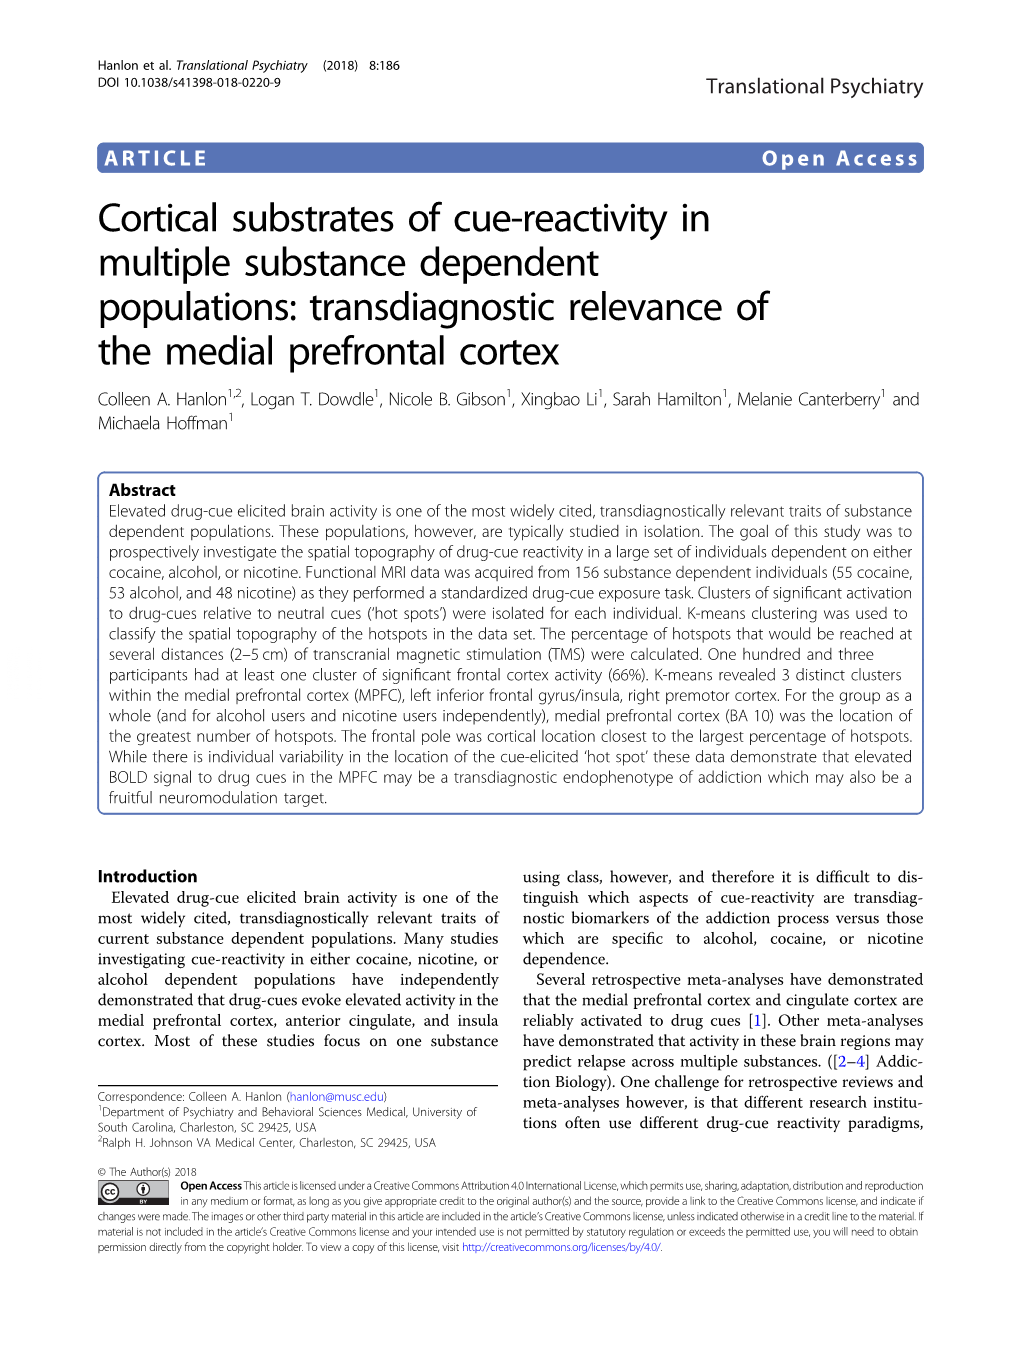 Cortical Substrates of Cue-Reactivity in Multiple Substance Dependent Populations: Transdiagnostic Relevance of the Medial Prefrontal Cortex Colleen A